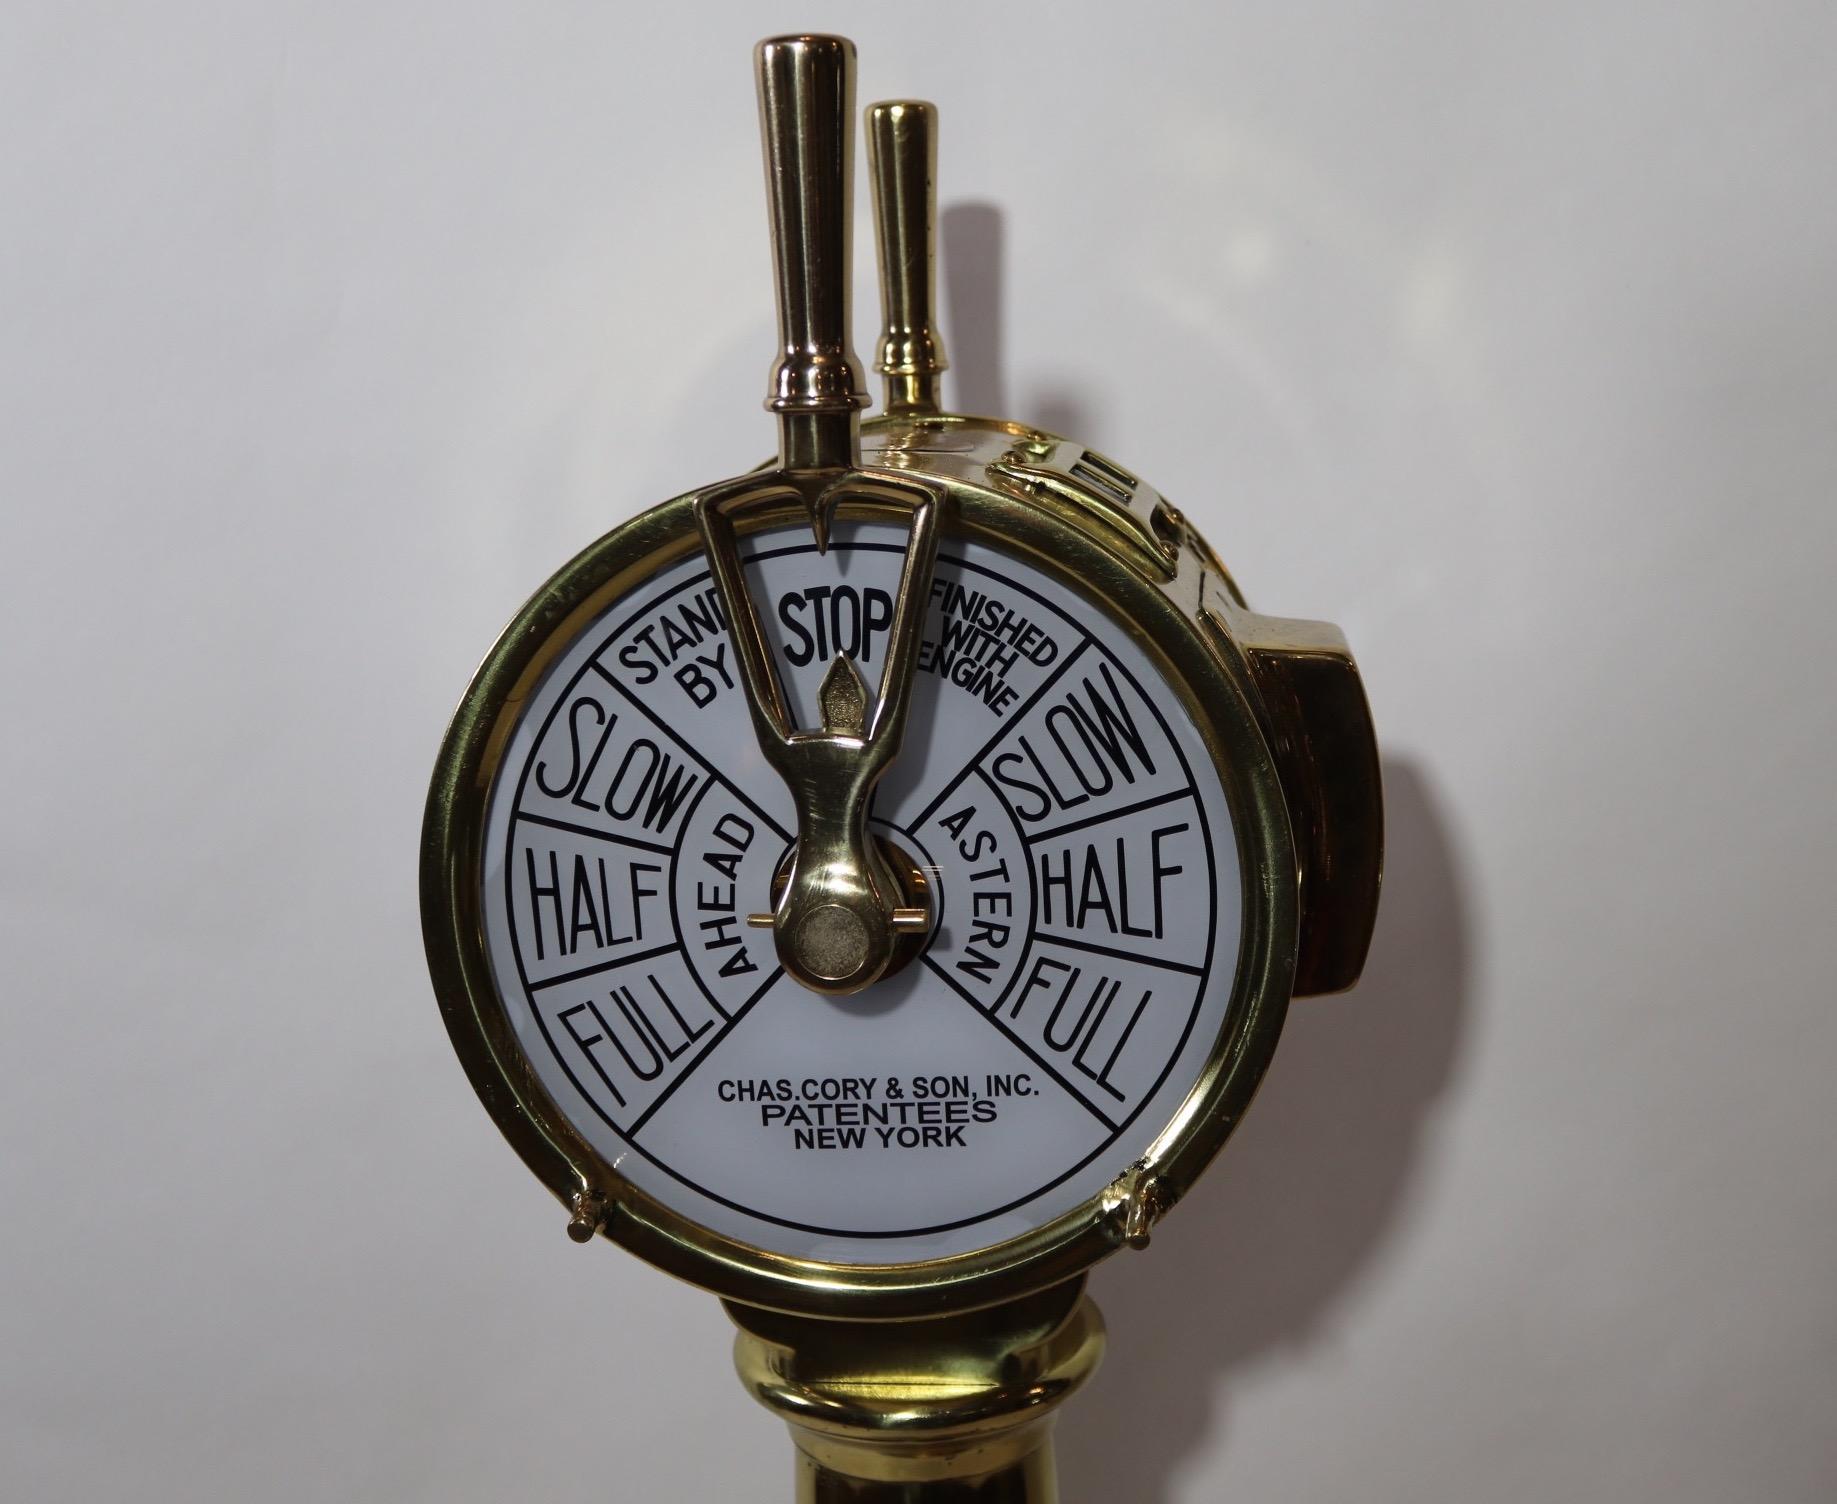 Brass bridge telegraph with command face plates of New York. Highly polished and lacquered. Interior is wired for illumination. Fitted to a thick wood base with rich finish. Very fine condition, circa 1925. Measures: 48